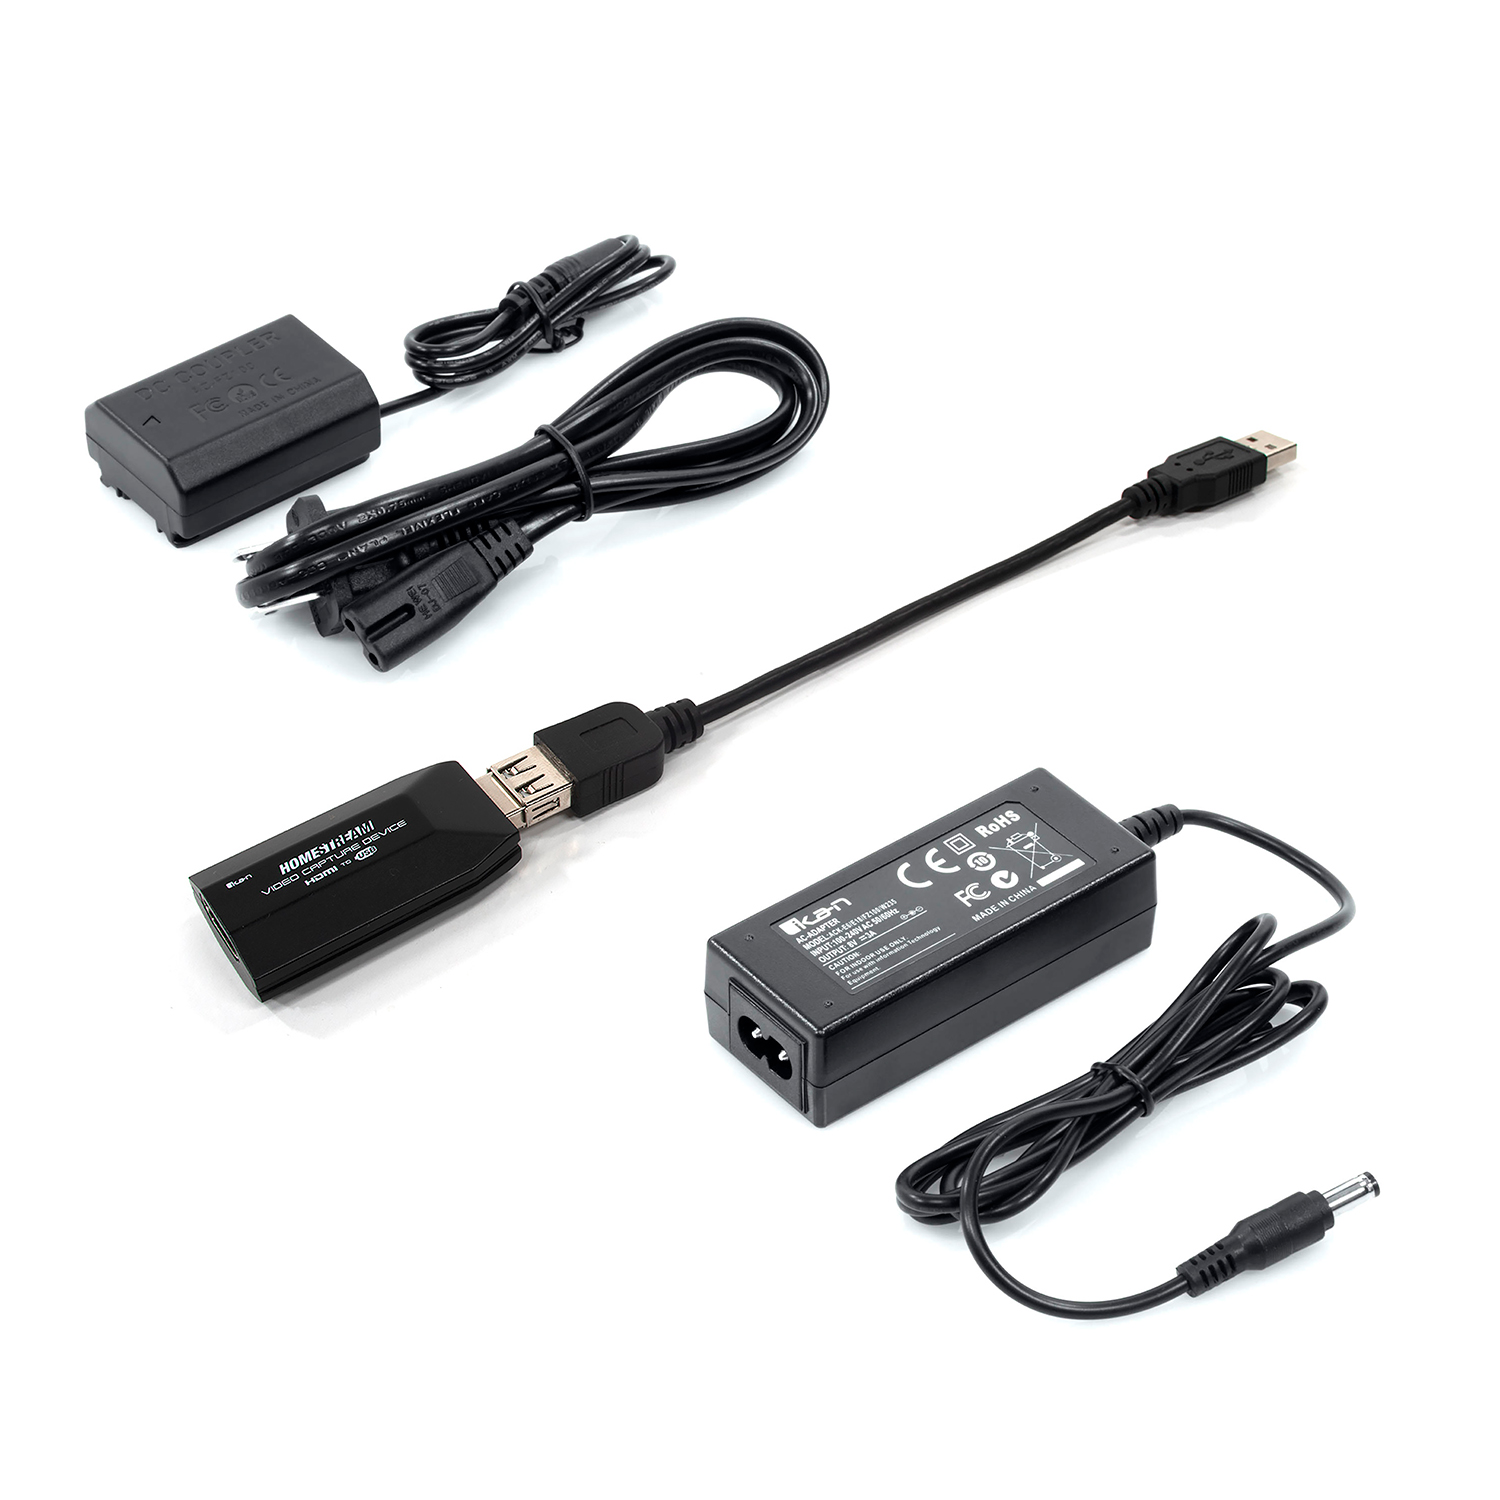 HomeStream™ HDMI to USB Video Capture Device w/ STRATUS Dummy Battery for Sony Cameras